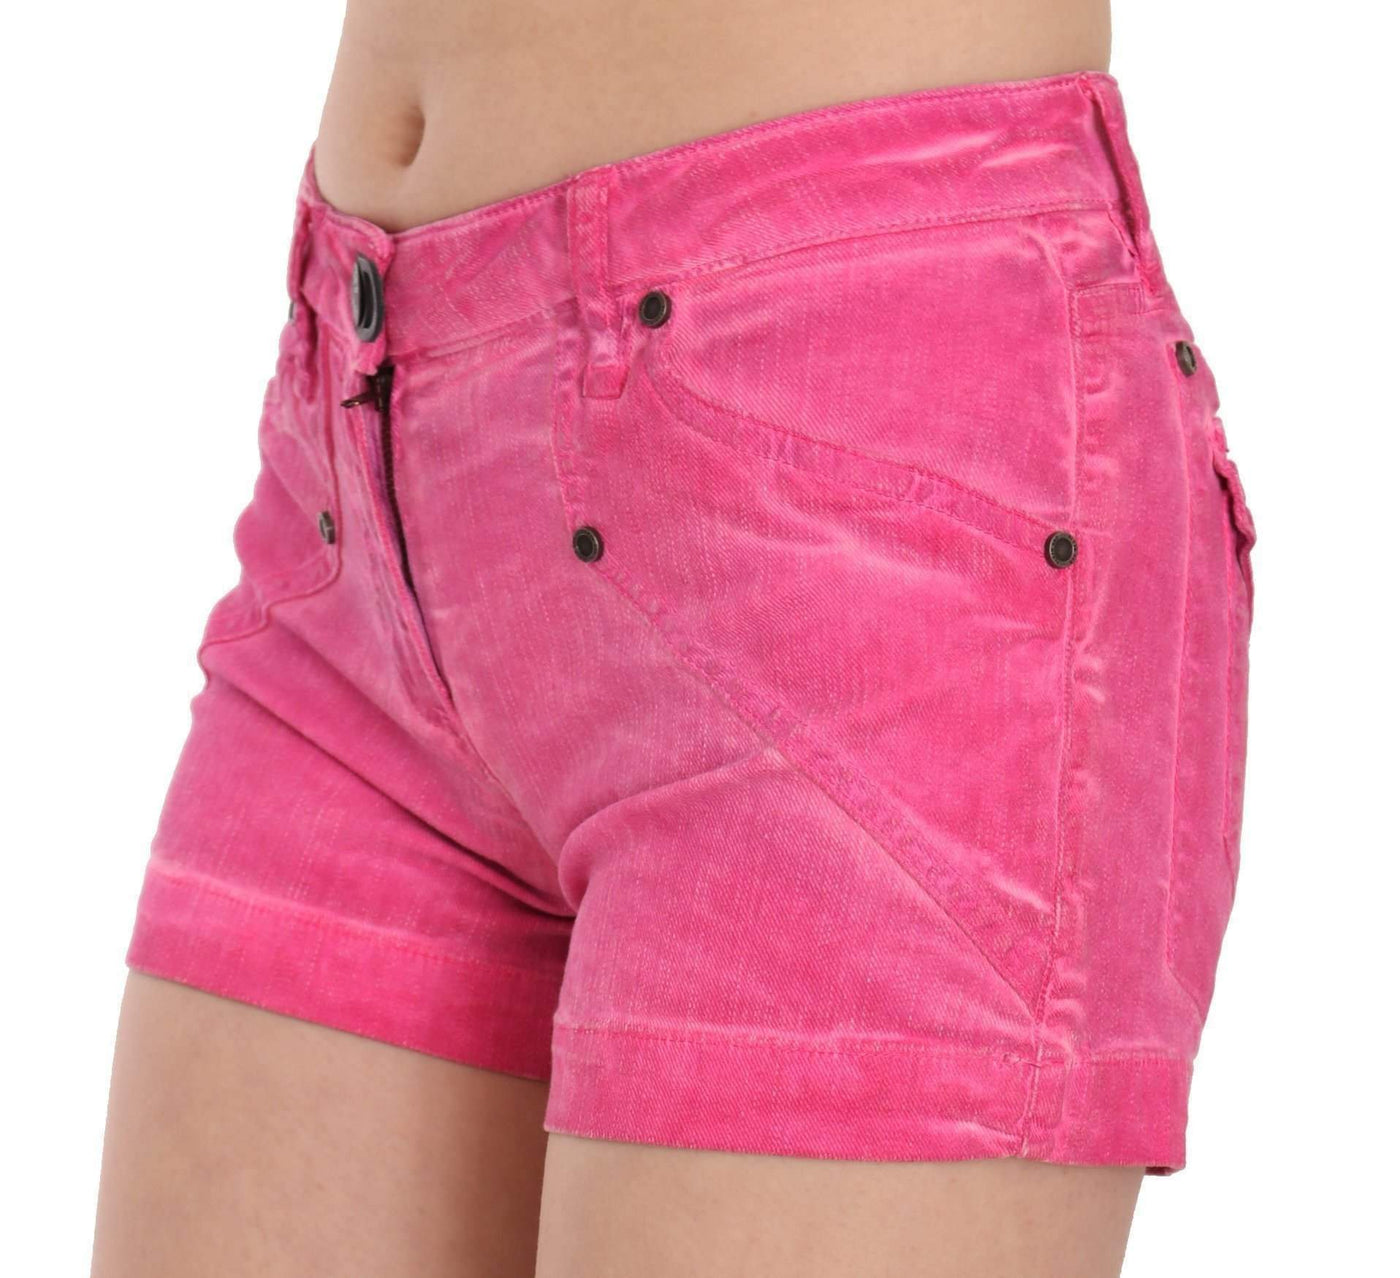 PLEIN SUD  Mid Waist Cotton Denim Mini Shorts #women, Catch, feed-agegroup-adult, feed-color-pink, feed-gender-female, feed-size-IT36 | XS, feed-size-IT38|XS, feed-size-IT42|M, Gender_Women, IT36 | XS, IT38|XS, IT42|M, Kogan, Pink, PLEIN SUD, Shorts - Women - Clothing, Women - New Arrivals at SEYMAYKA